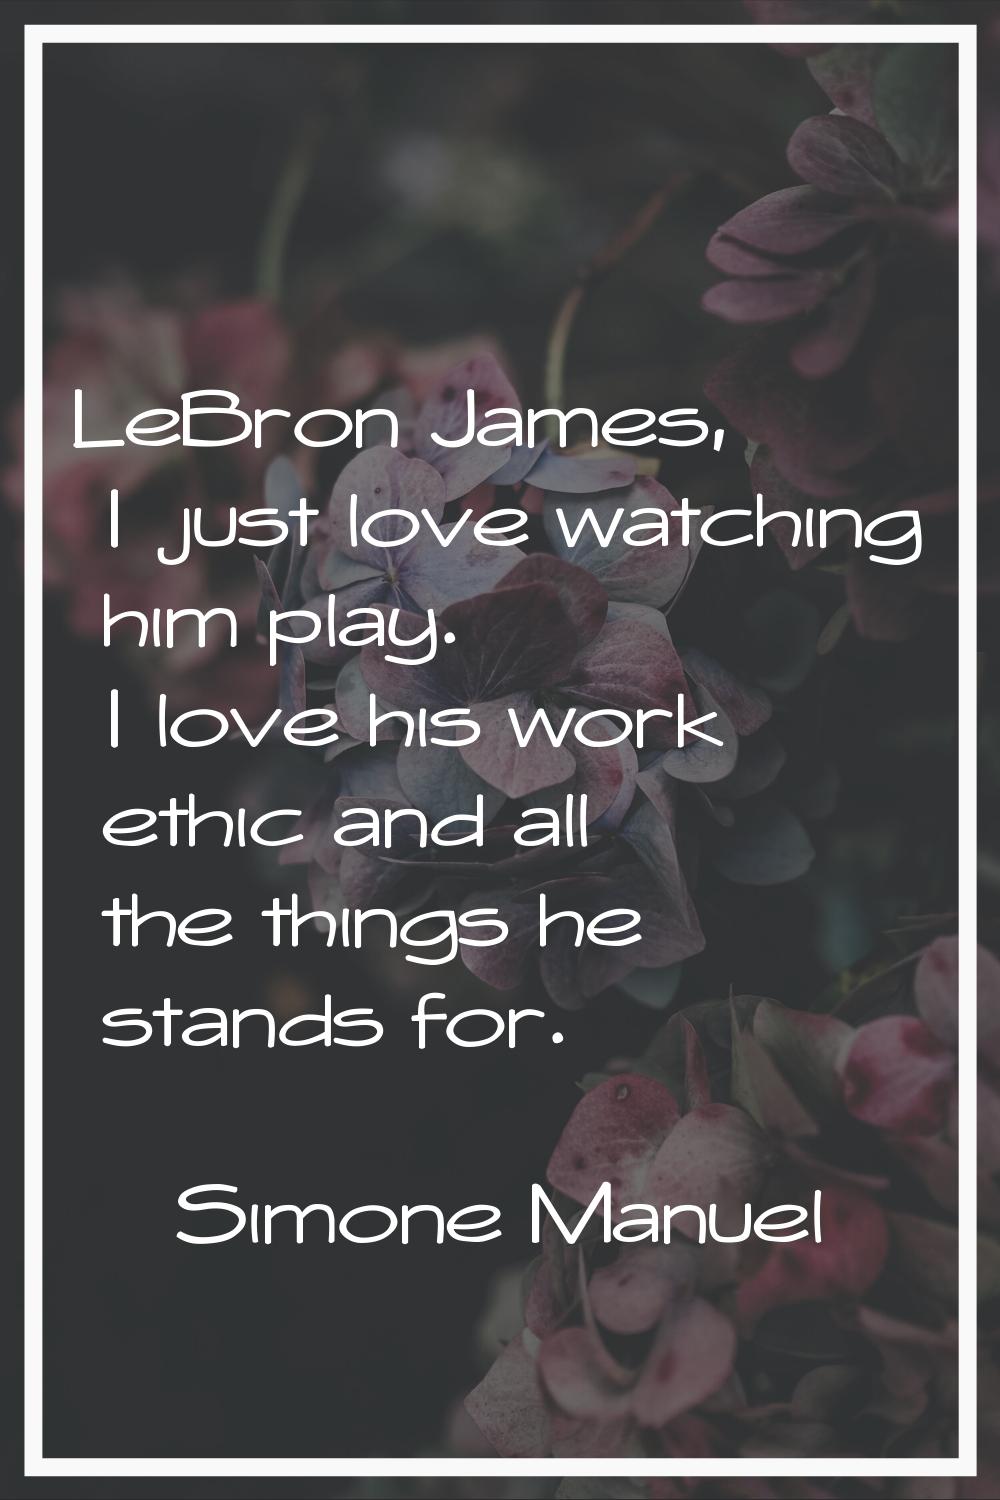 LeBron James, I just love watching him play. I love his work ethic and all the things he stands for